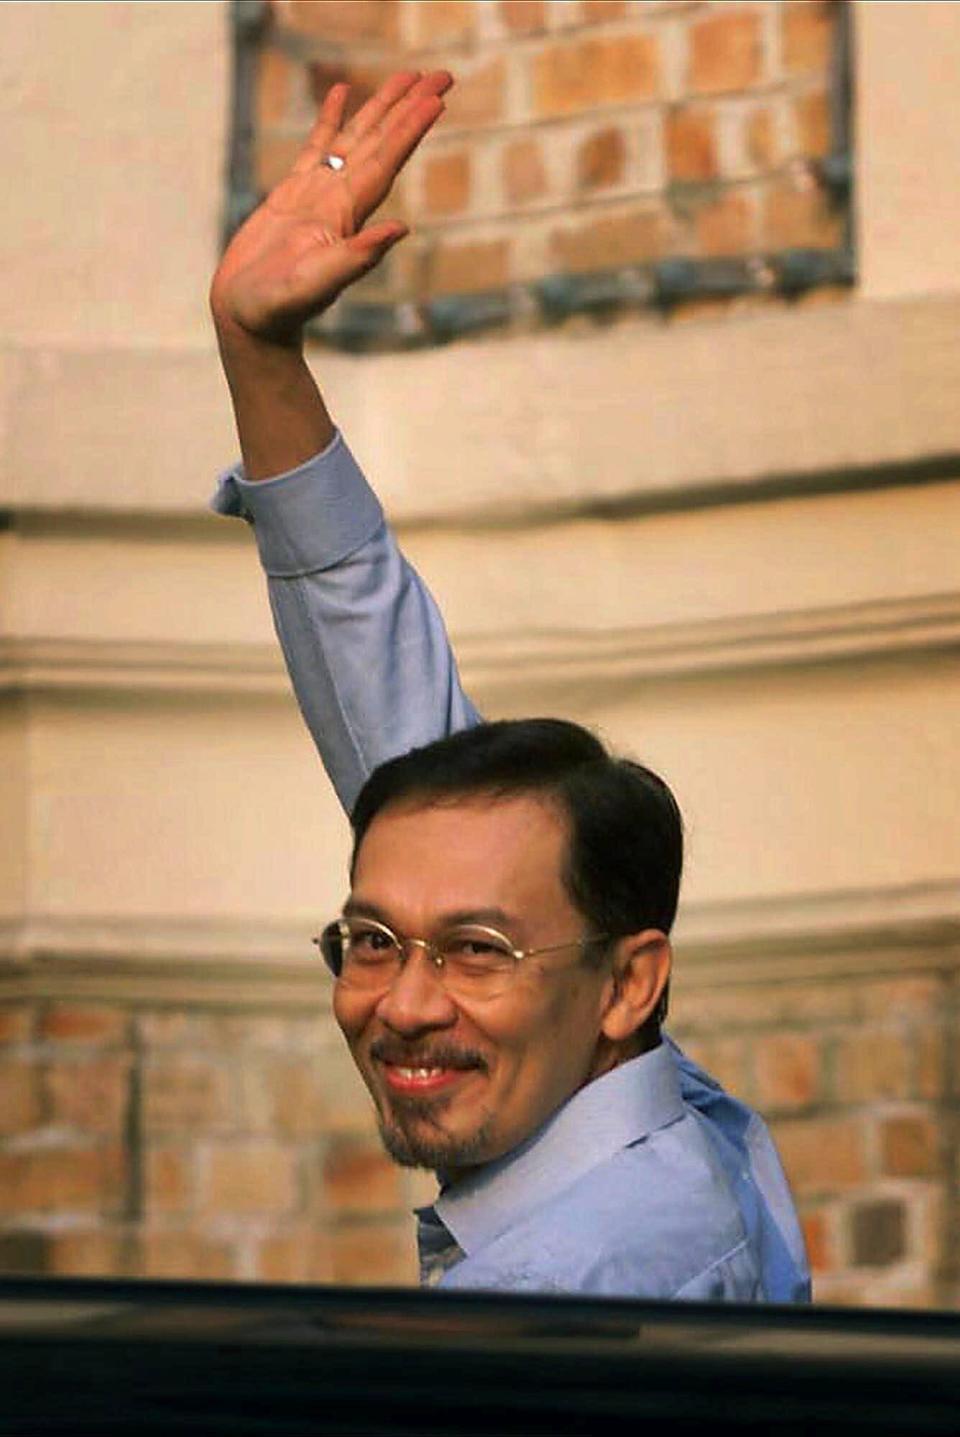 FILE - Then ousted Malaysian Deputy Prime Minister Anwar Ibrahim waves to photographers when he arrives at the federal courthouse in Kuala Lumpur for his trial on sodomy charges on June 8, 1999. With a battle cry of “We Can,” reformist opposition leader Anwar Ibrahim has launched what could be his last chance to fulfill a 2-decade-long quest to become Malaysia’s leader in Nov. 19, 2022, general elections. (AP Photo/Vincent Thian, File)